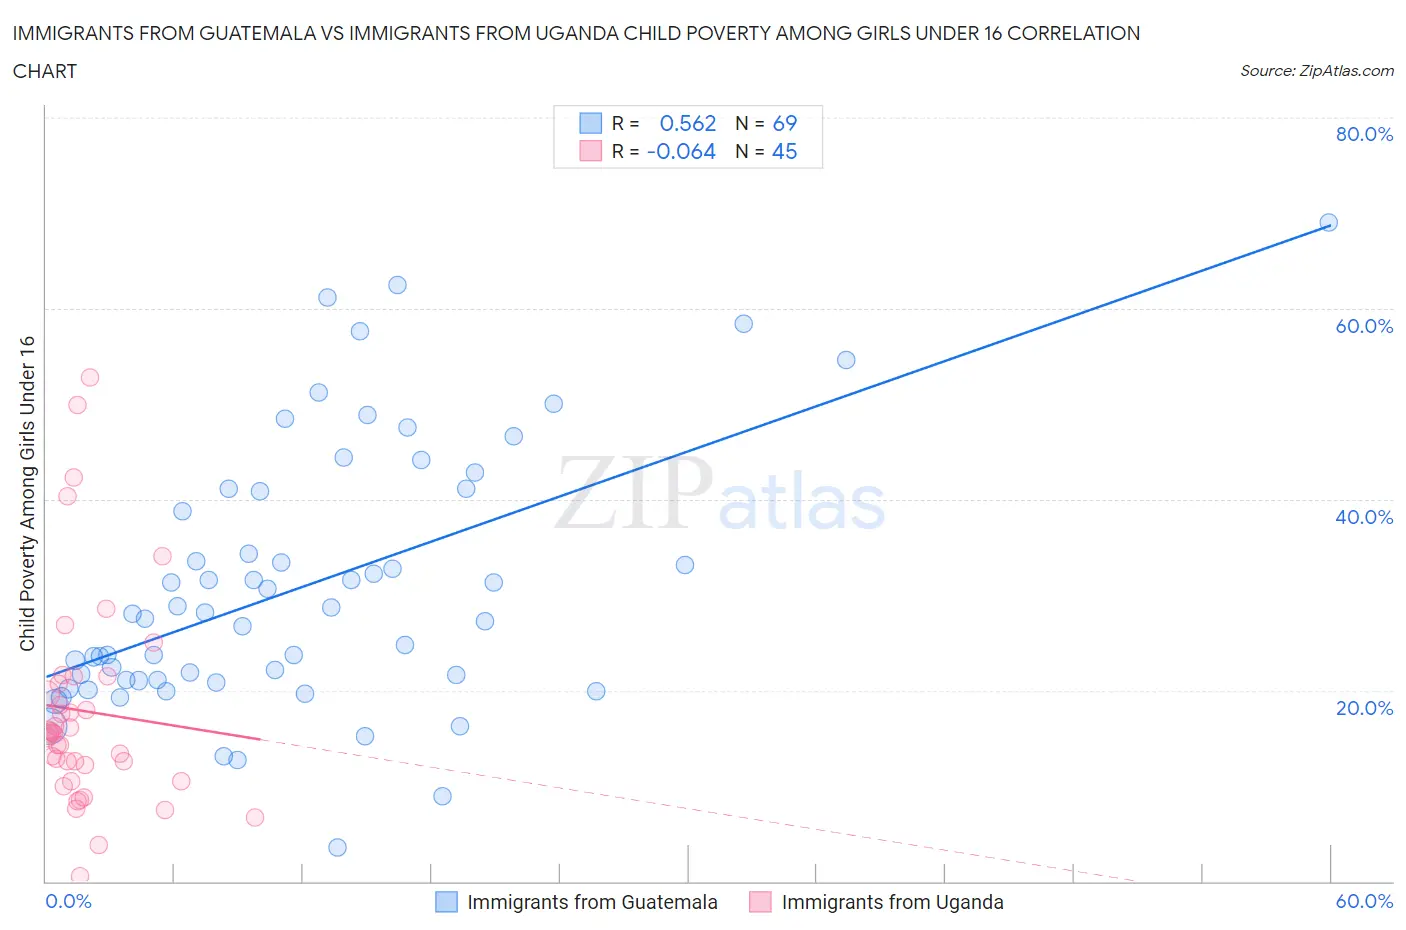 Immigrants from Guatemala vs Immigrants from Uganda Child Poverty Among Girls Under 16